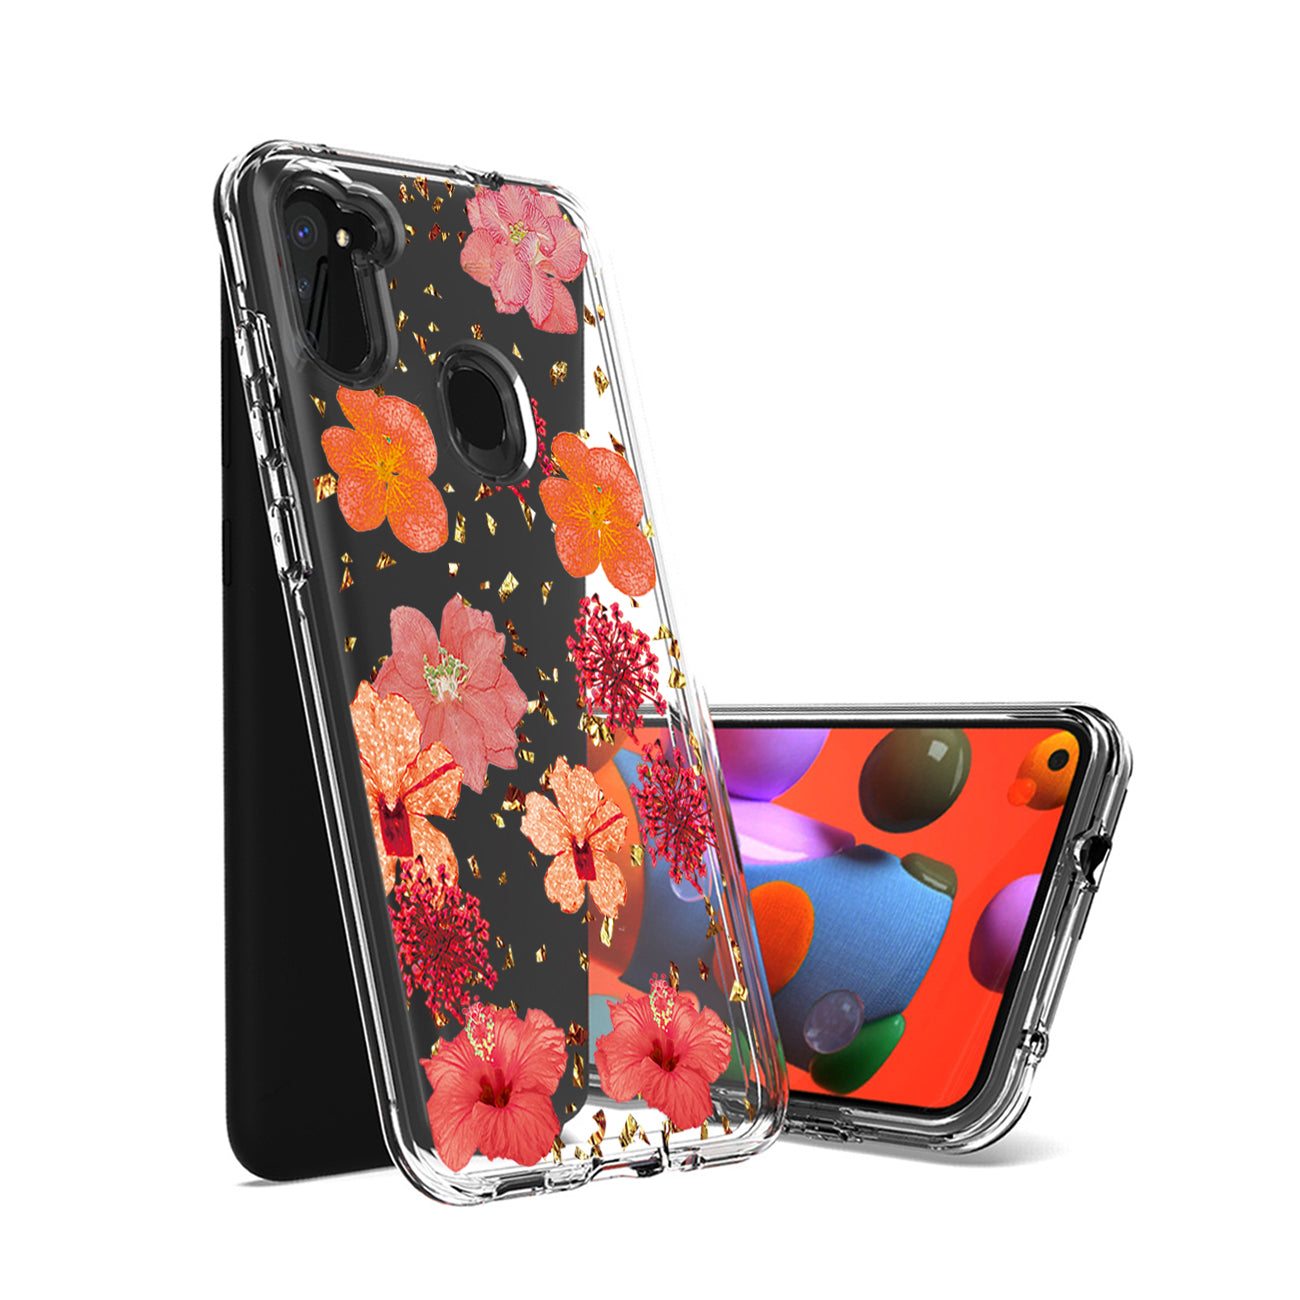 Pressed dried flower Design Phone case for SAMSUNG GALAXY A11 in Red